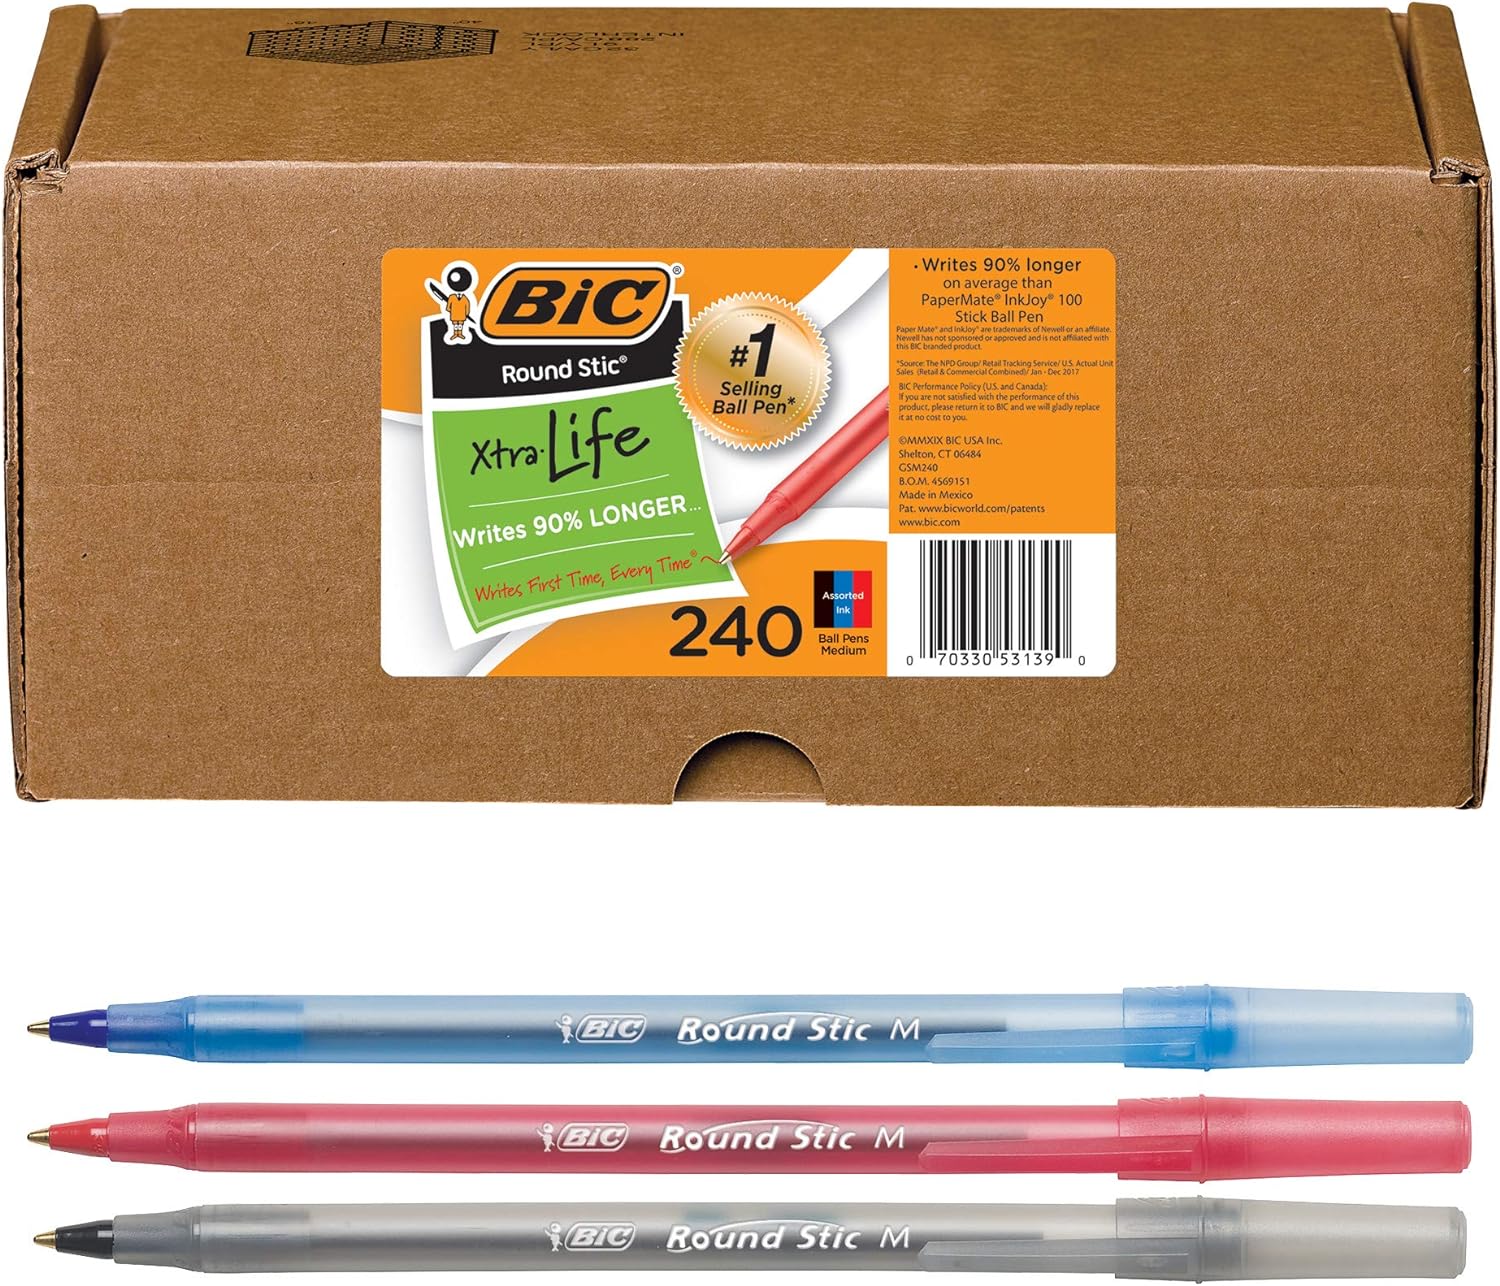 I use these pens to pack in the shoe boxes. They are a great product at a great price.